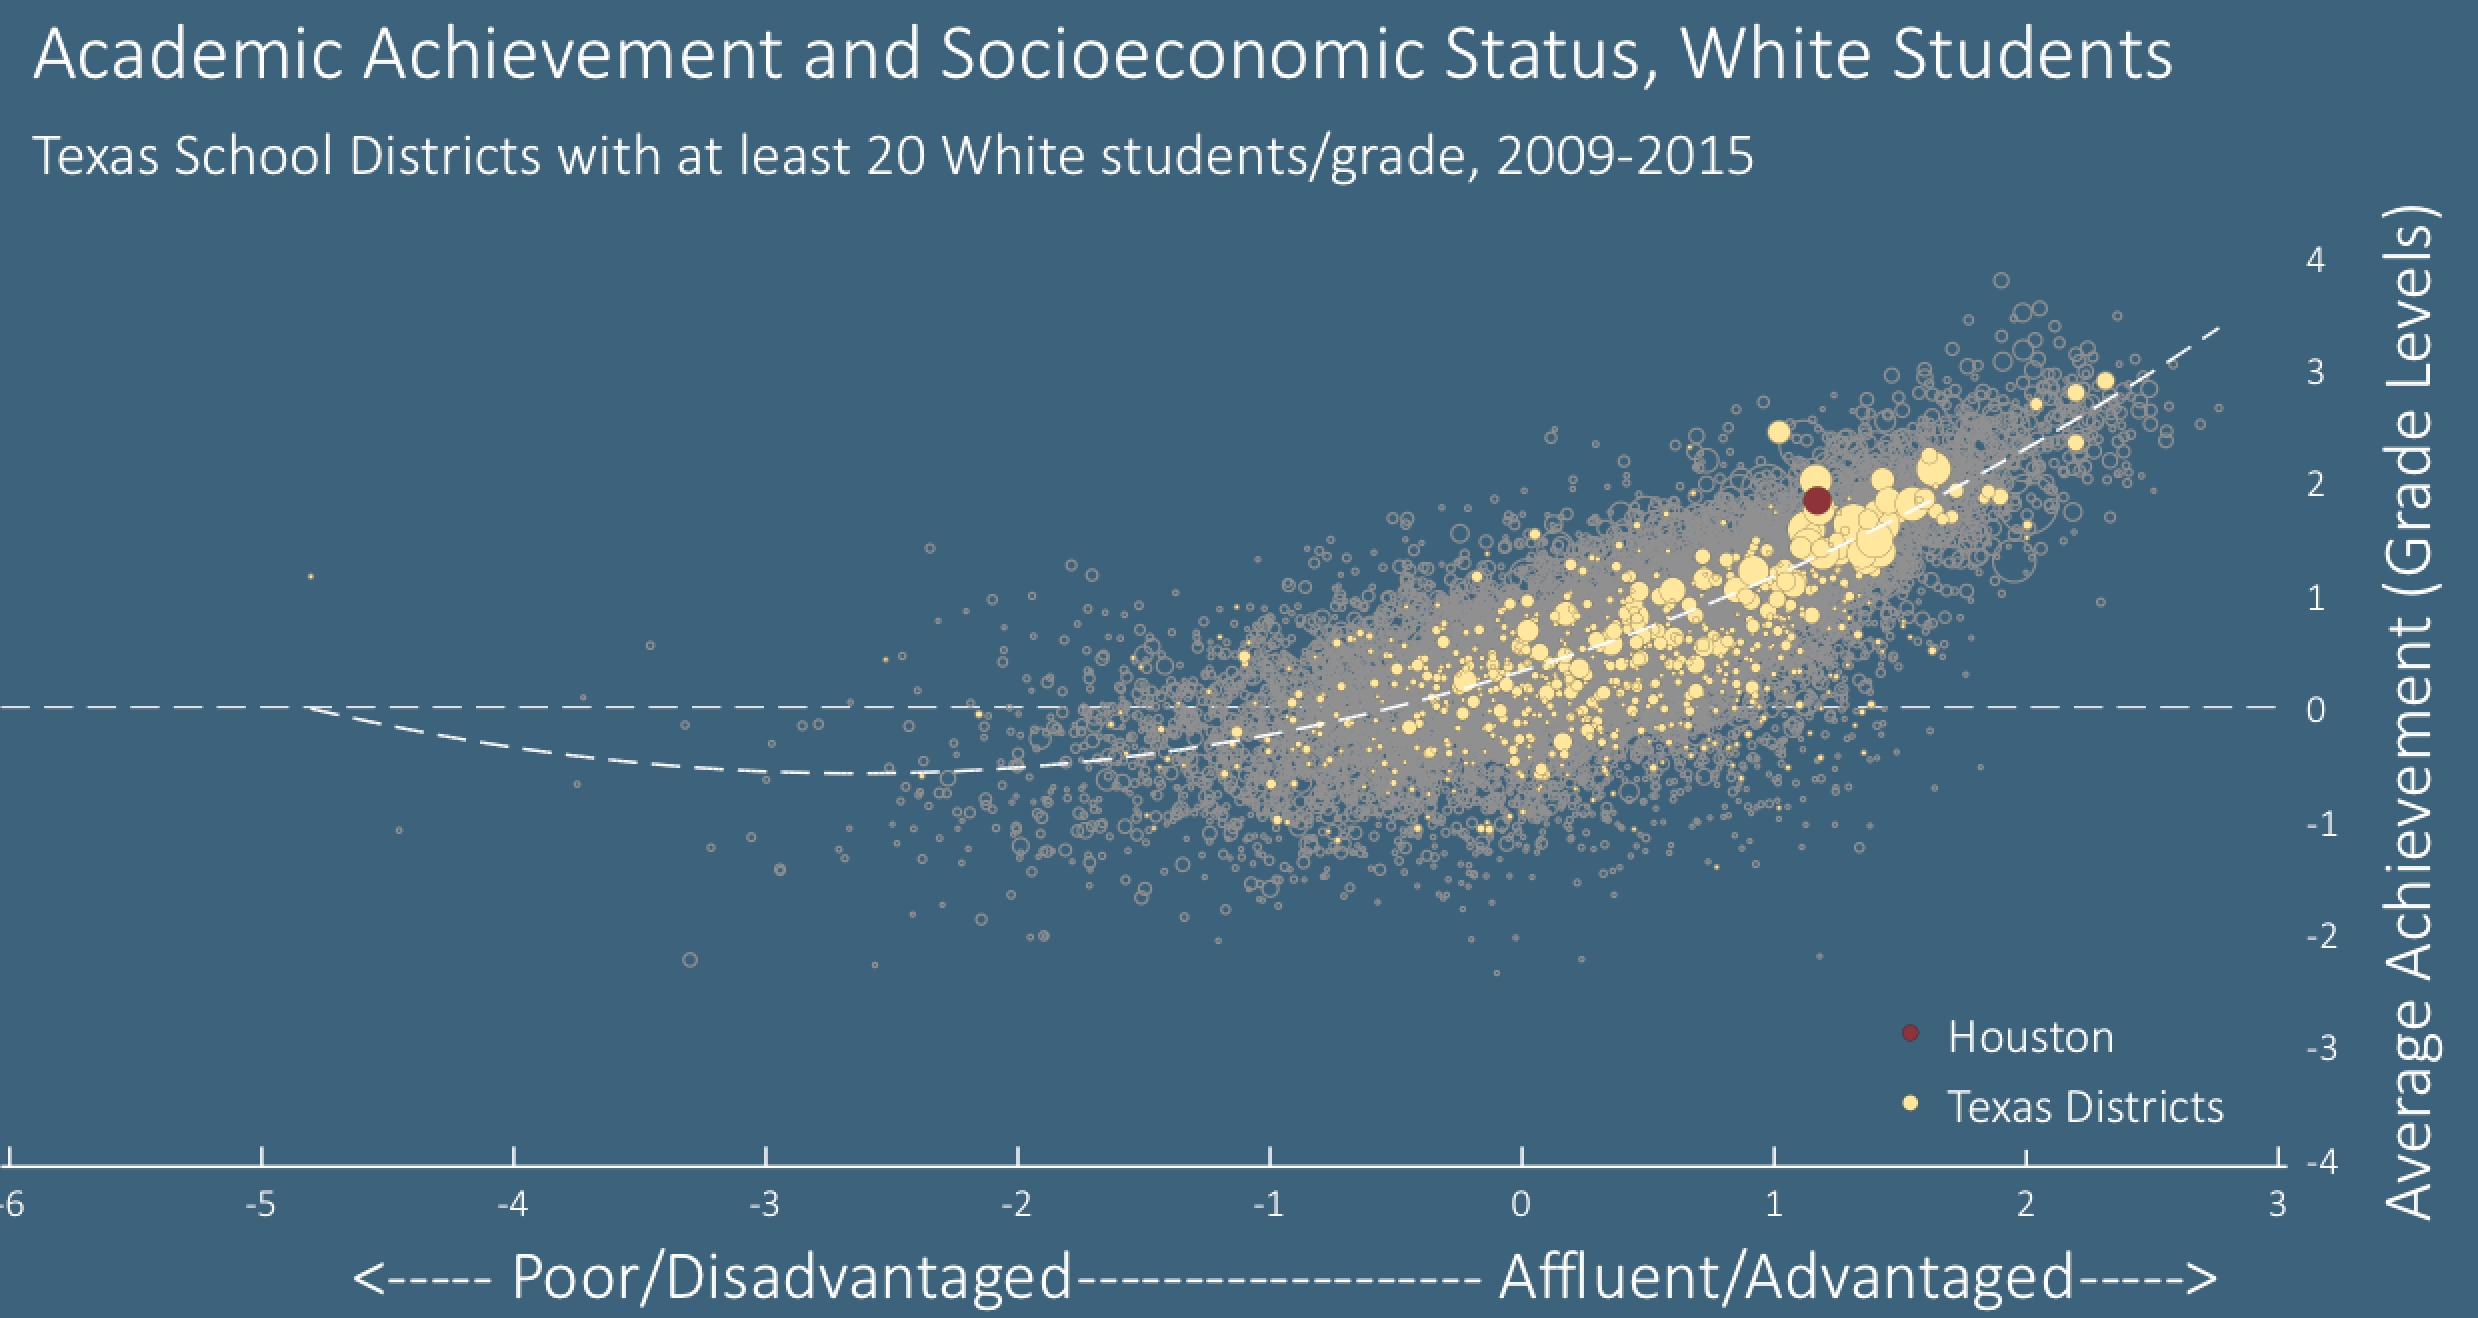 White student performance on standardized tests in each district plotted against socioeconomic status. Houston Independent School District shown in red. Source: Sean Reardon.